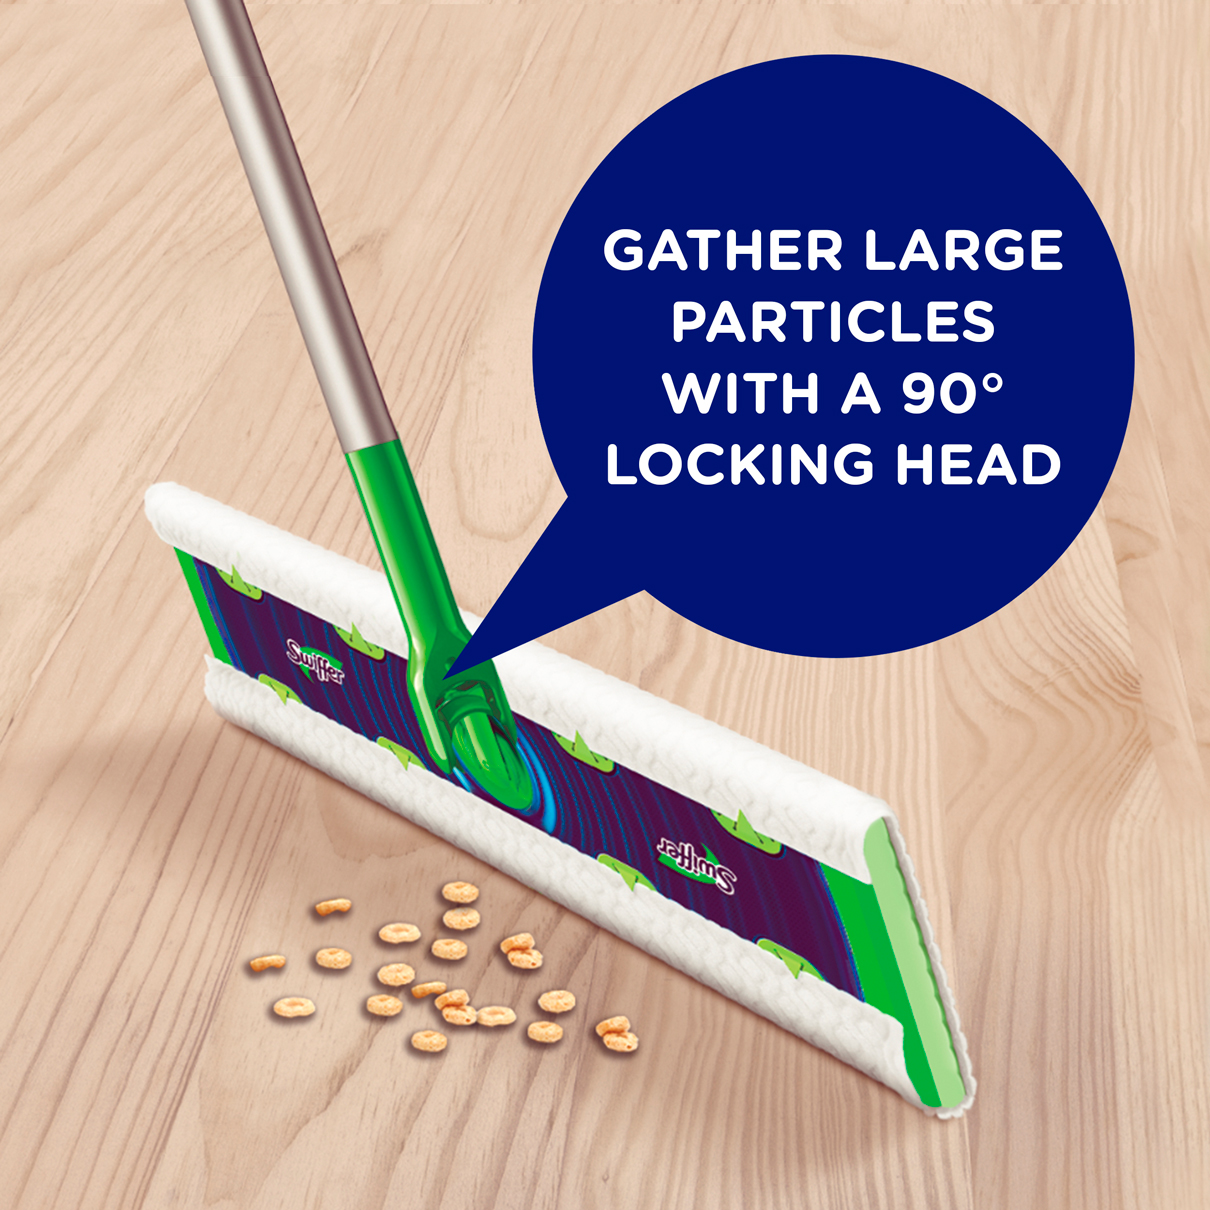 Shop All Swiffer Sweeper Products